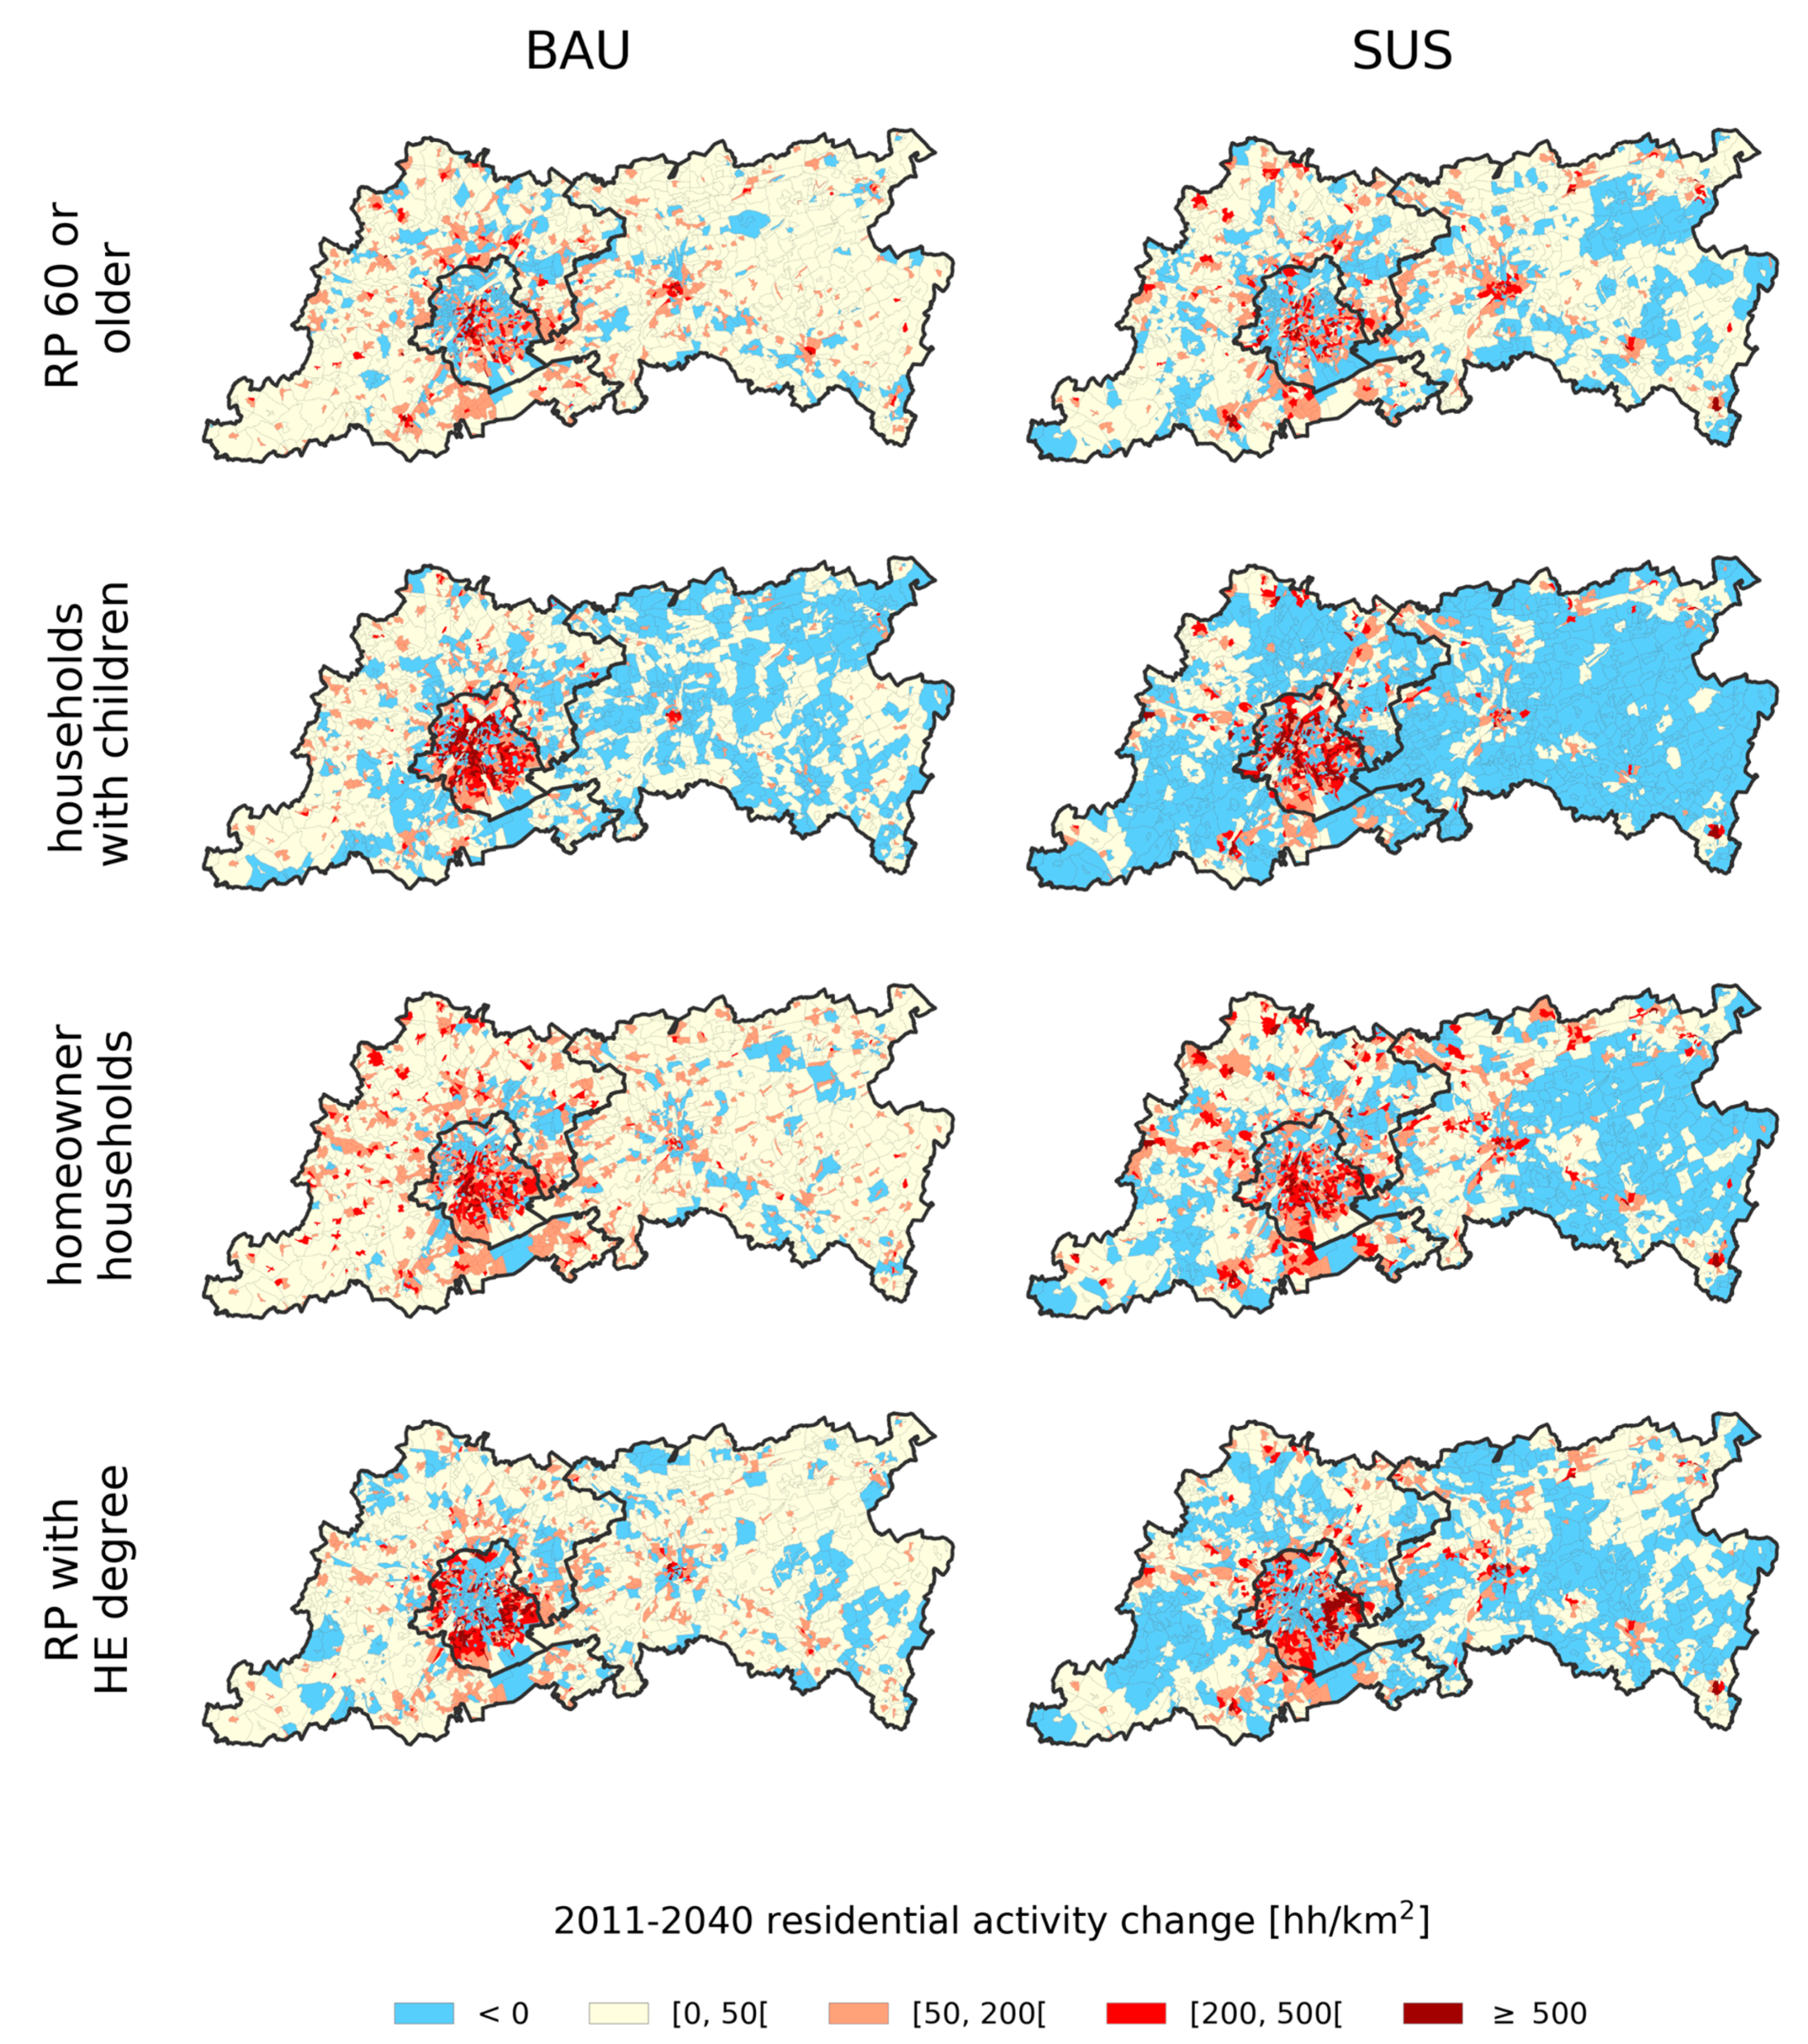 Sustainability | Free Full-Text | Microsimulation of Residential Activity  for Alternative Urban Development Scenarios: A Case Study on Brussels and  Flemish Brabant | HTML